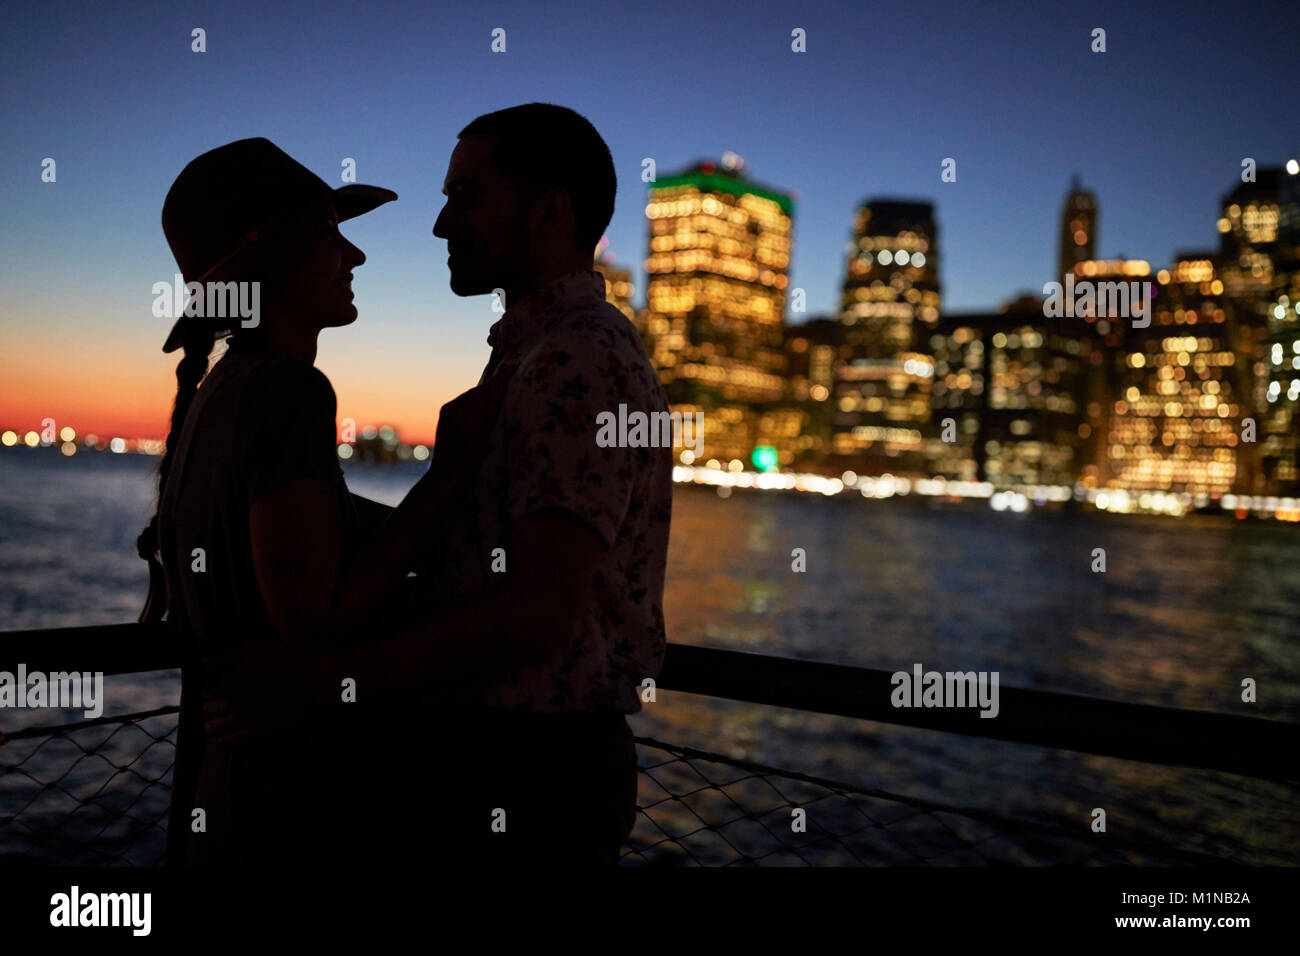 Silhouette Of Romantic Couple With City Skyline In Background Stock Photo